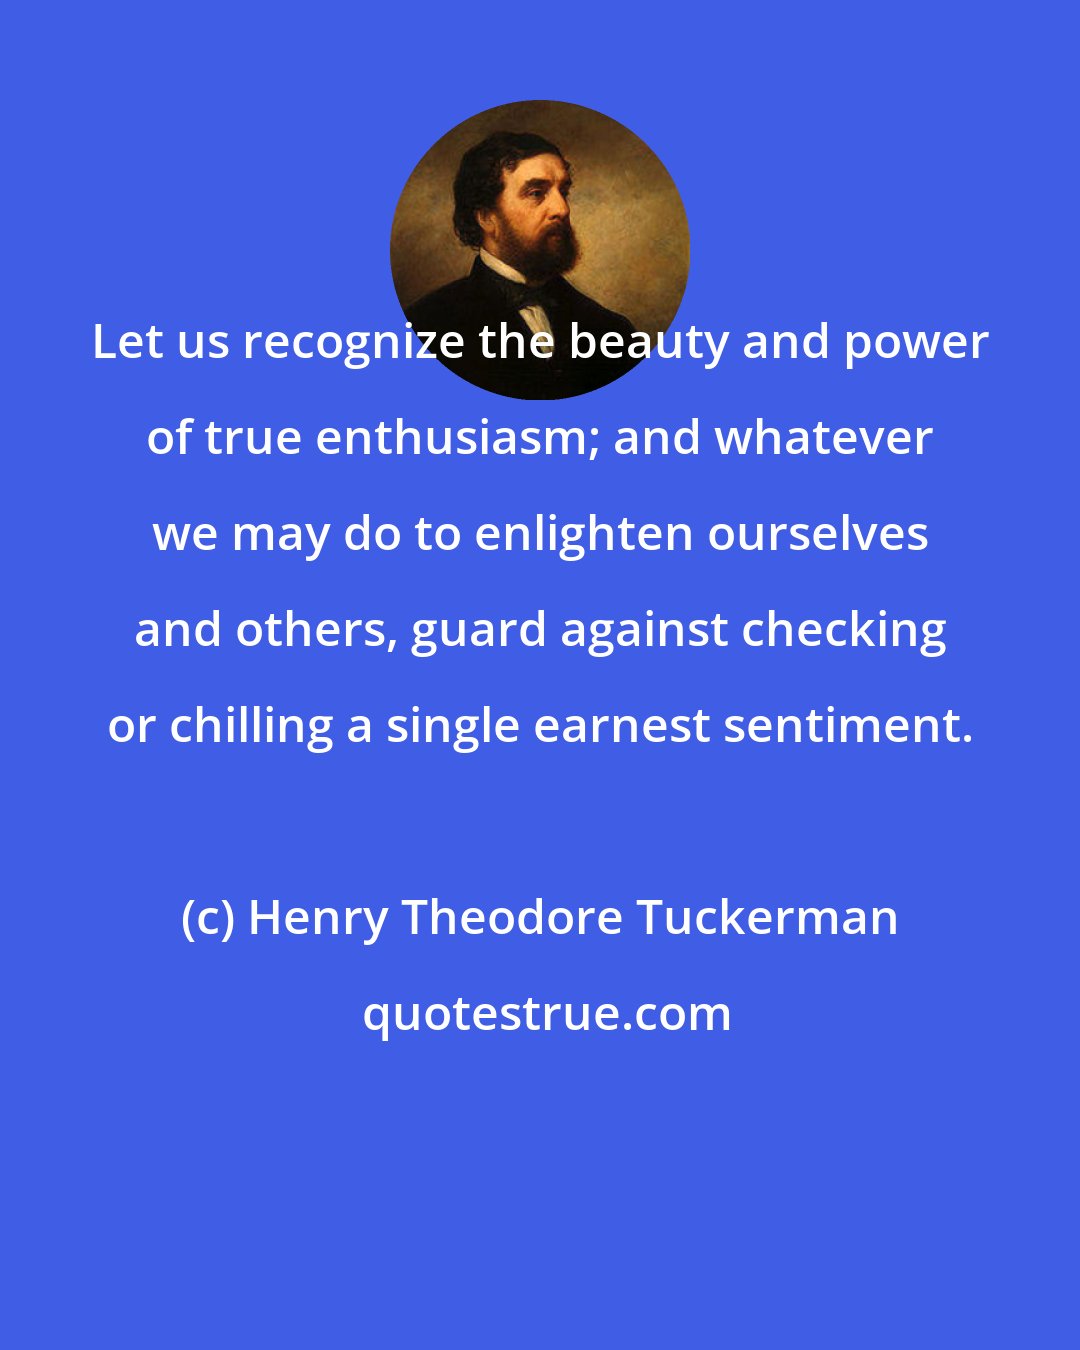 Henry Theodore Tuckerman: Let us recognize the beauty and power of true enthusiasm; and whatever we may do to enlighten ourselves and others, guard against checking or chilling a single earnest sentiment.